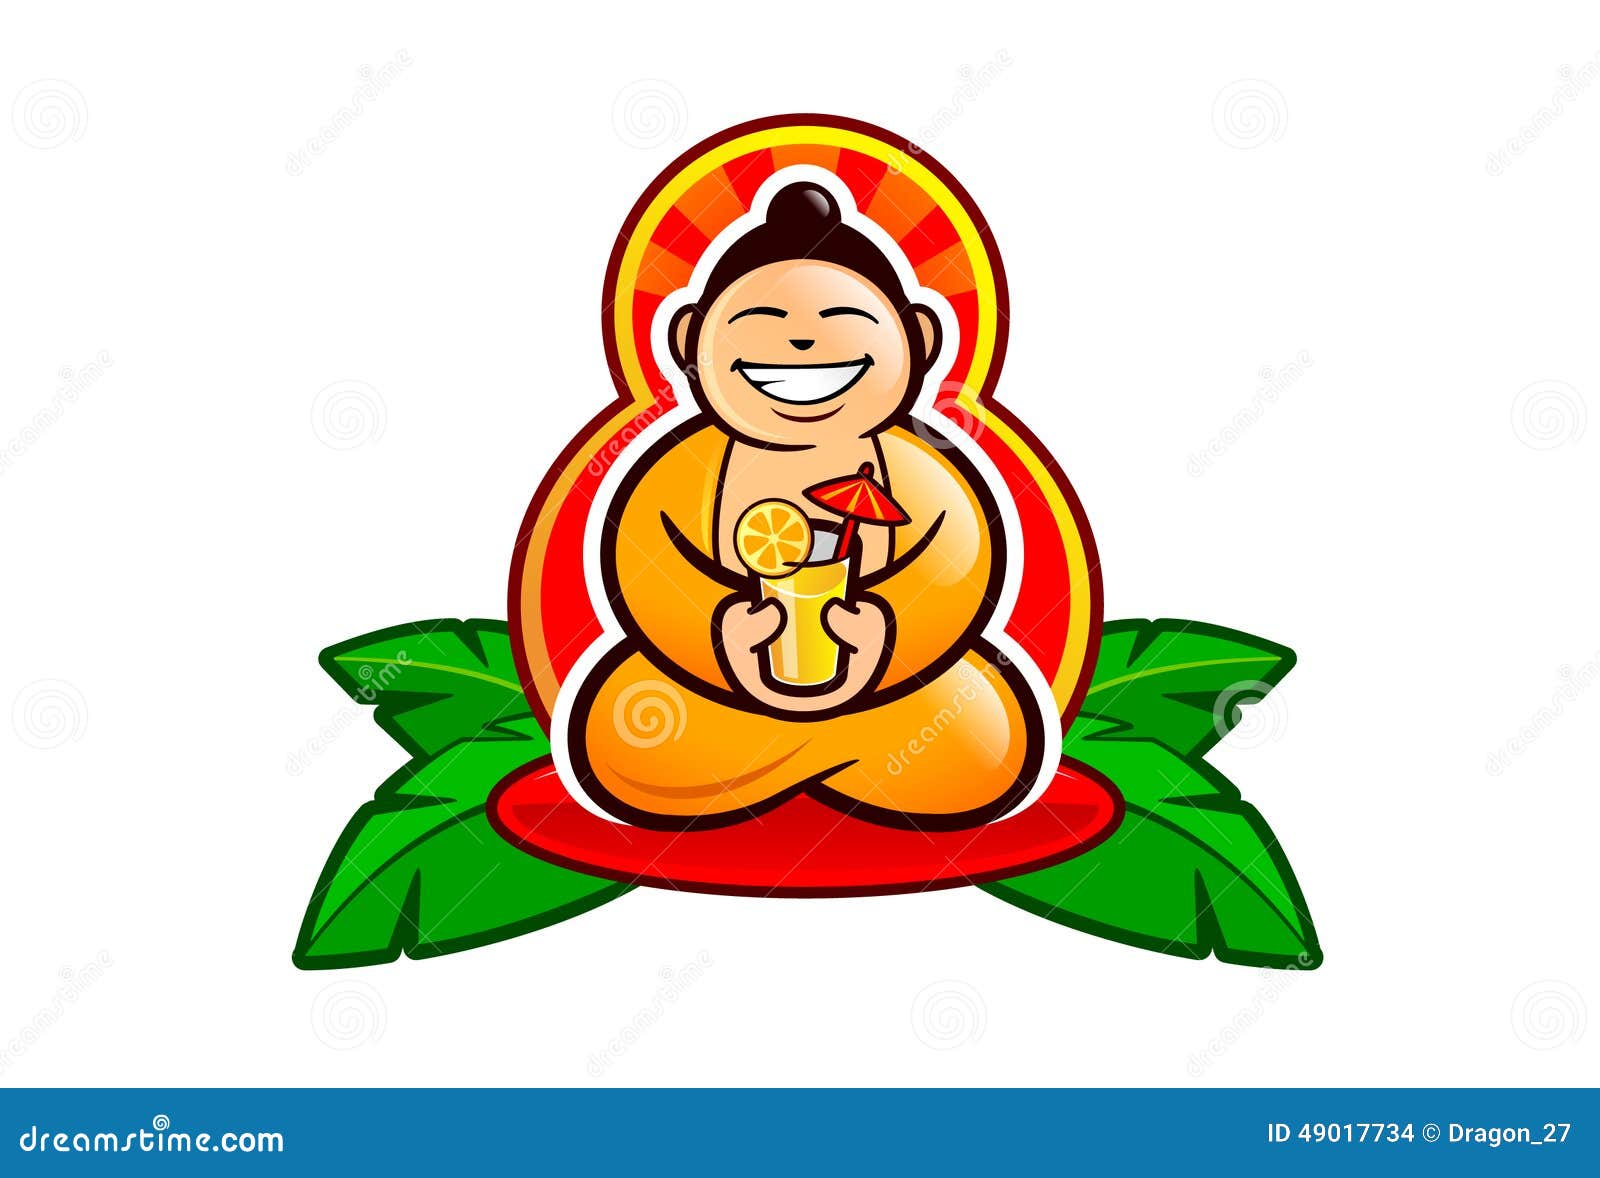 Laughing Buddha Cartoon Stock Illustrations – 45 Laughing Buddha Cartoon  Stock Illustrations, Vectors & Clipart - Dreamstime